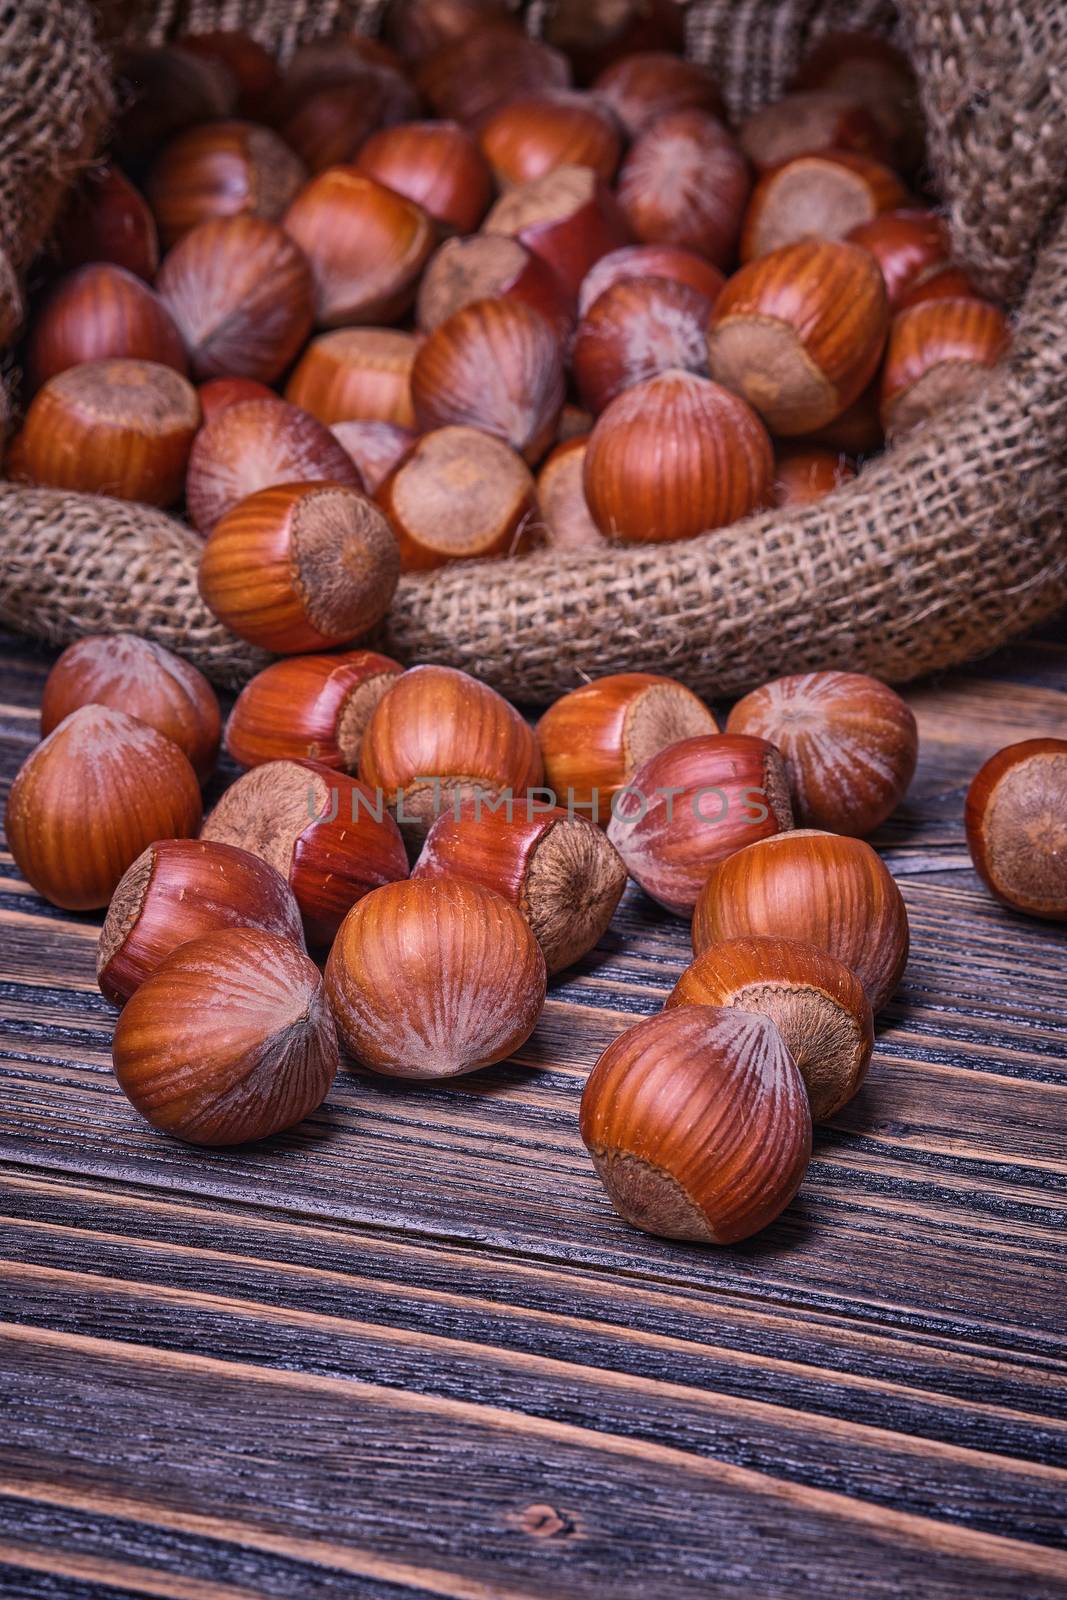 Hazelnuts in bag, vegetarian food in wooden bowls, on old wooden background by Fischeron